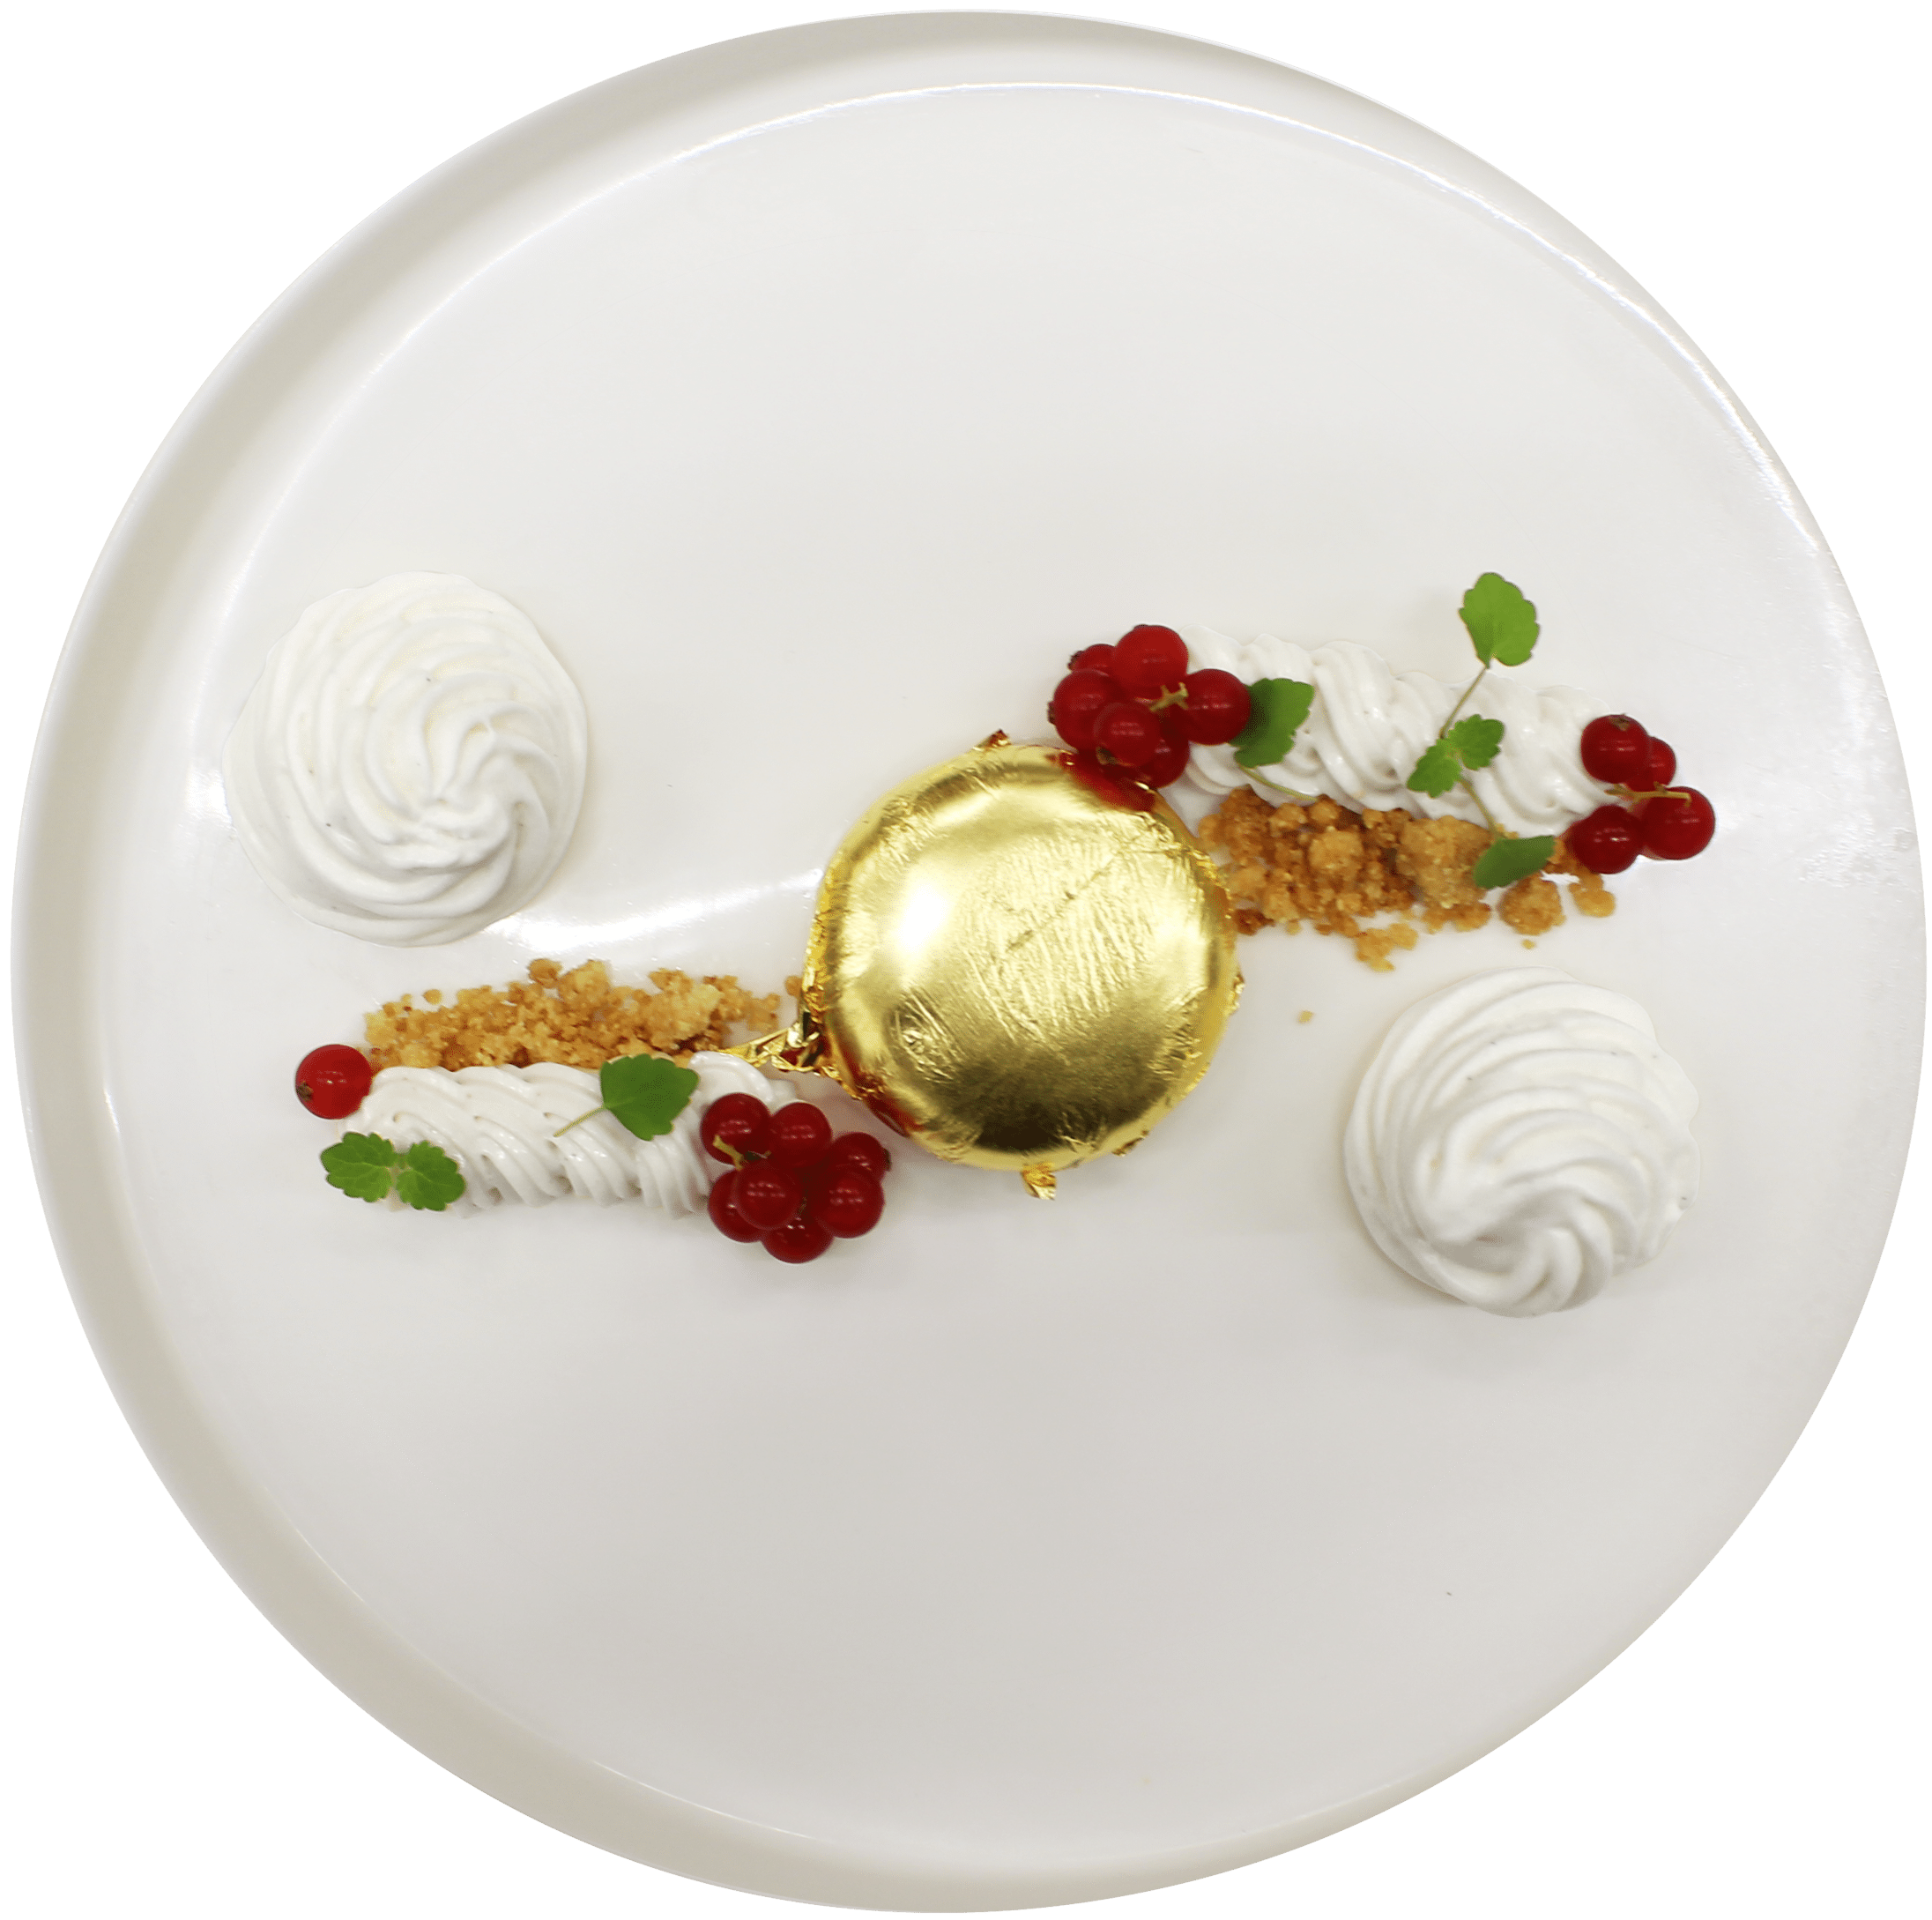 Image of a plate with cream in it